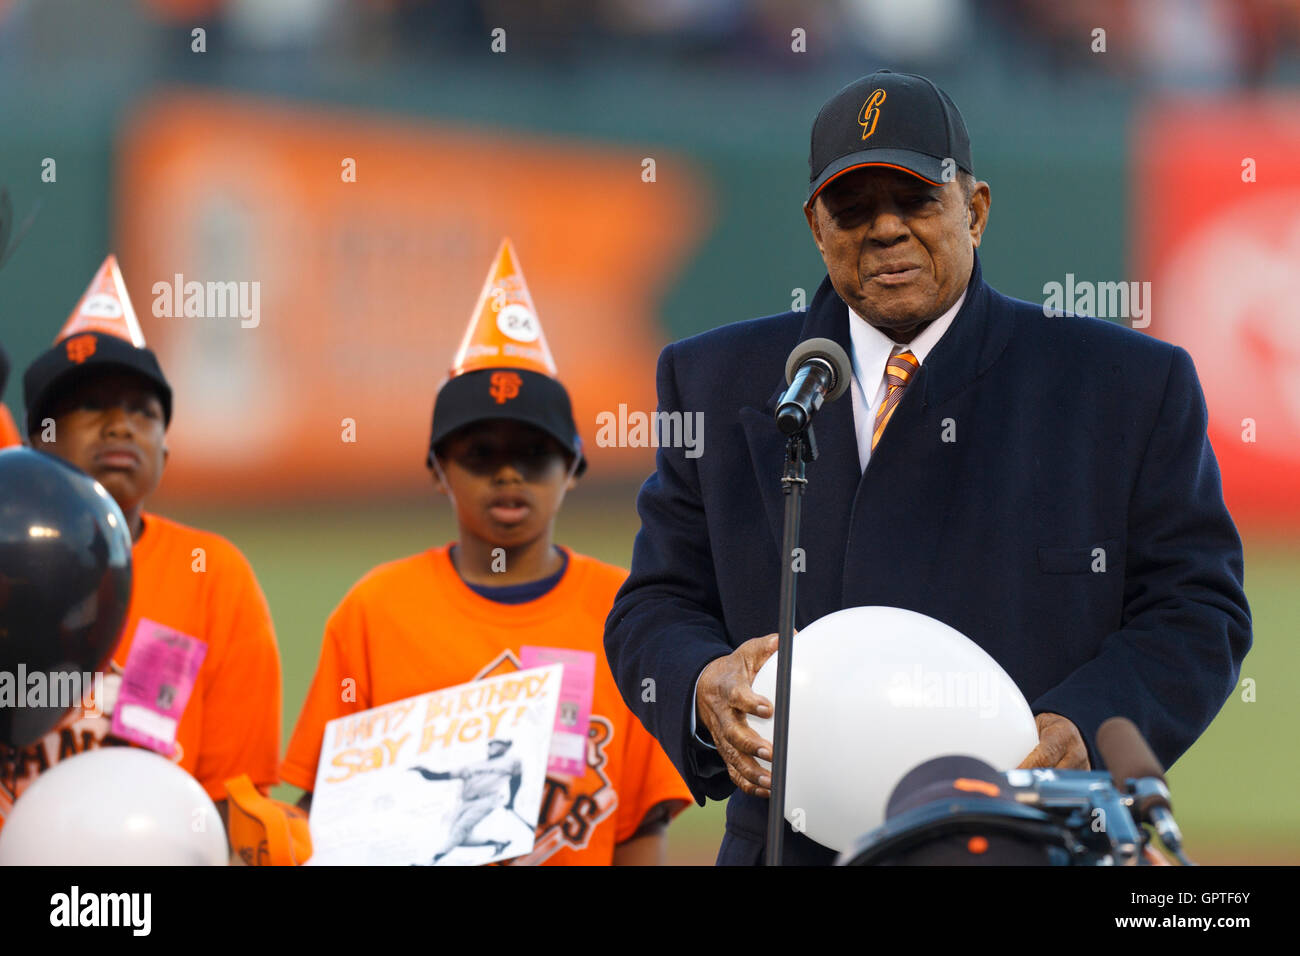 May 6, 2011; San Francisco, CA, USA;  Former San Francisco Giants center fielder Willie Mays was honored on his 80th birthday before the game between the San Francisco Giants and the Colorado Rockies at AT&T Park. Stock Photo